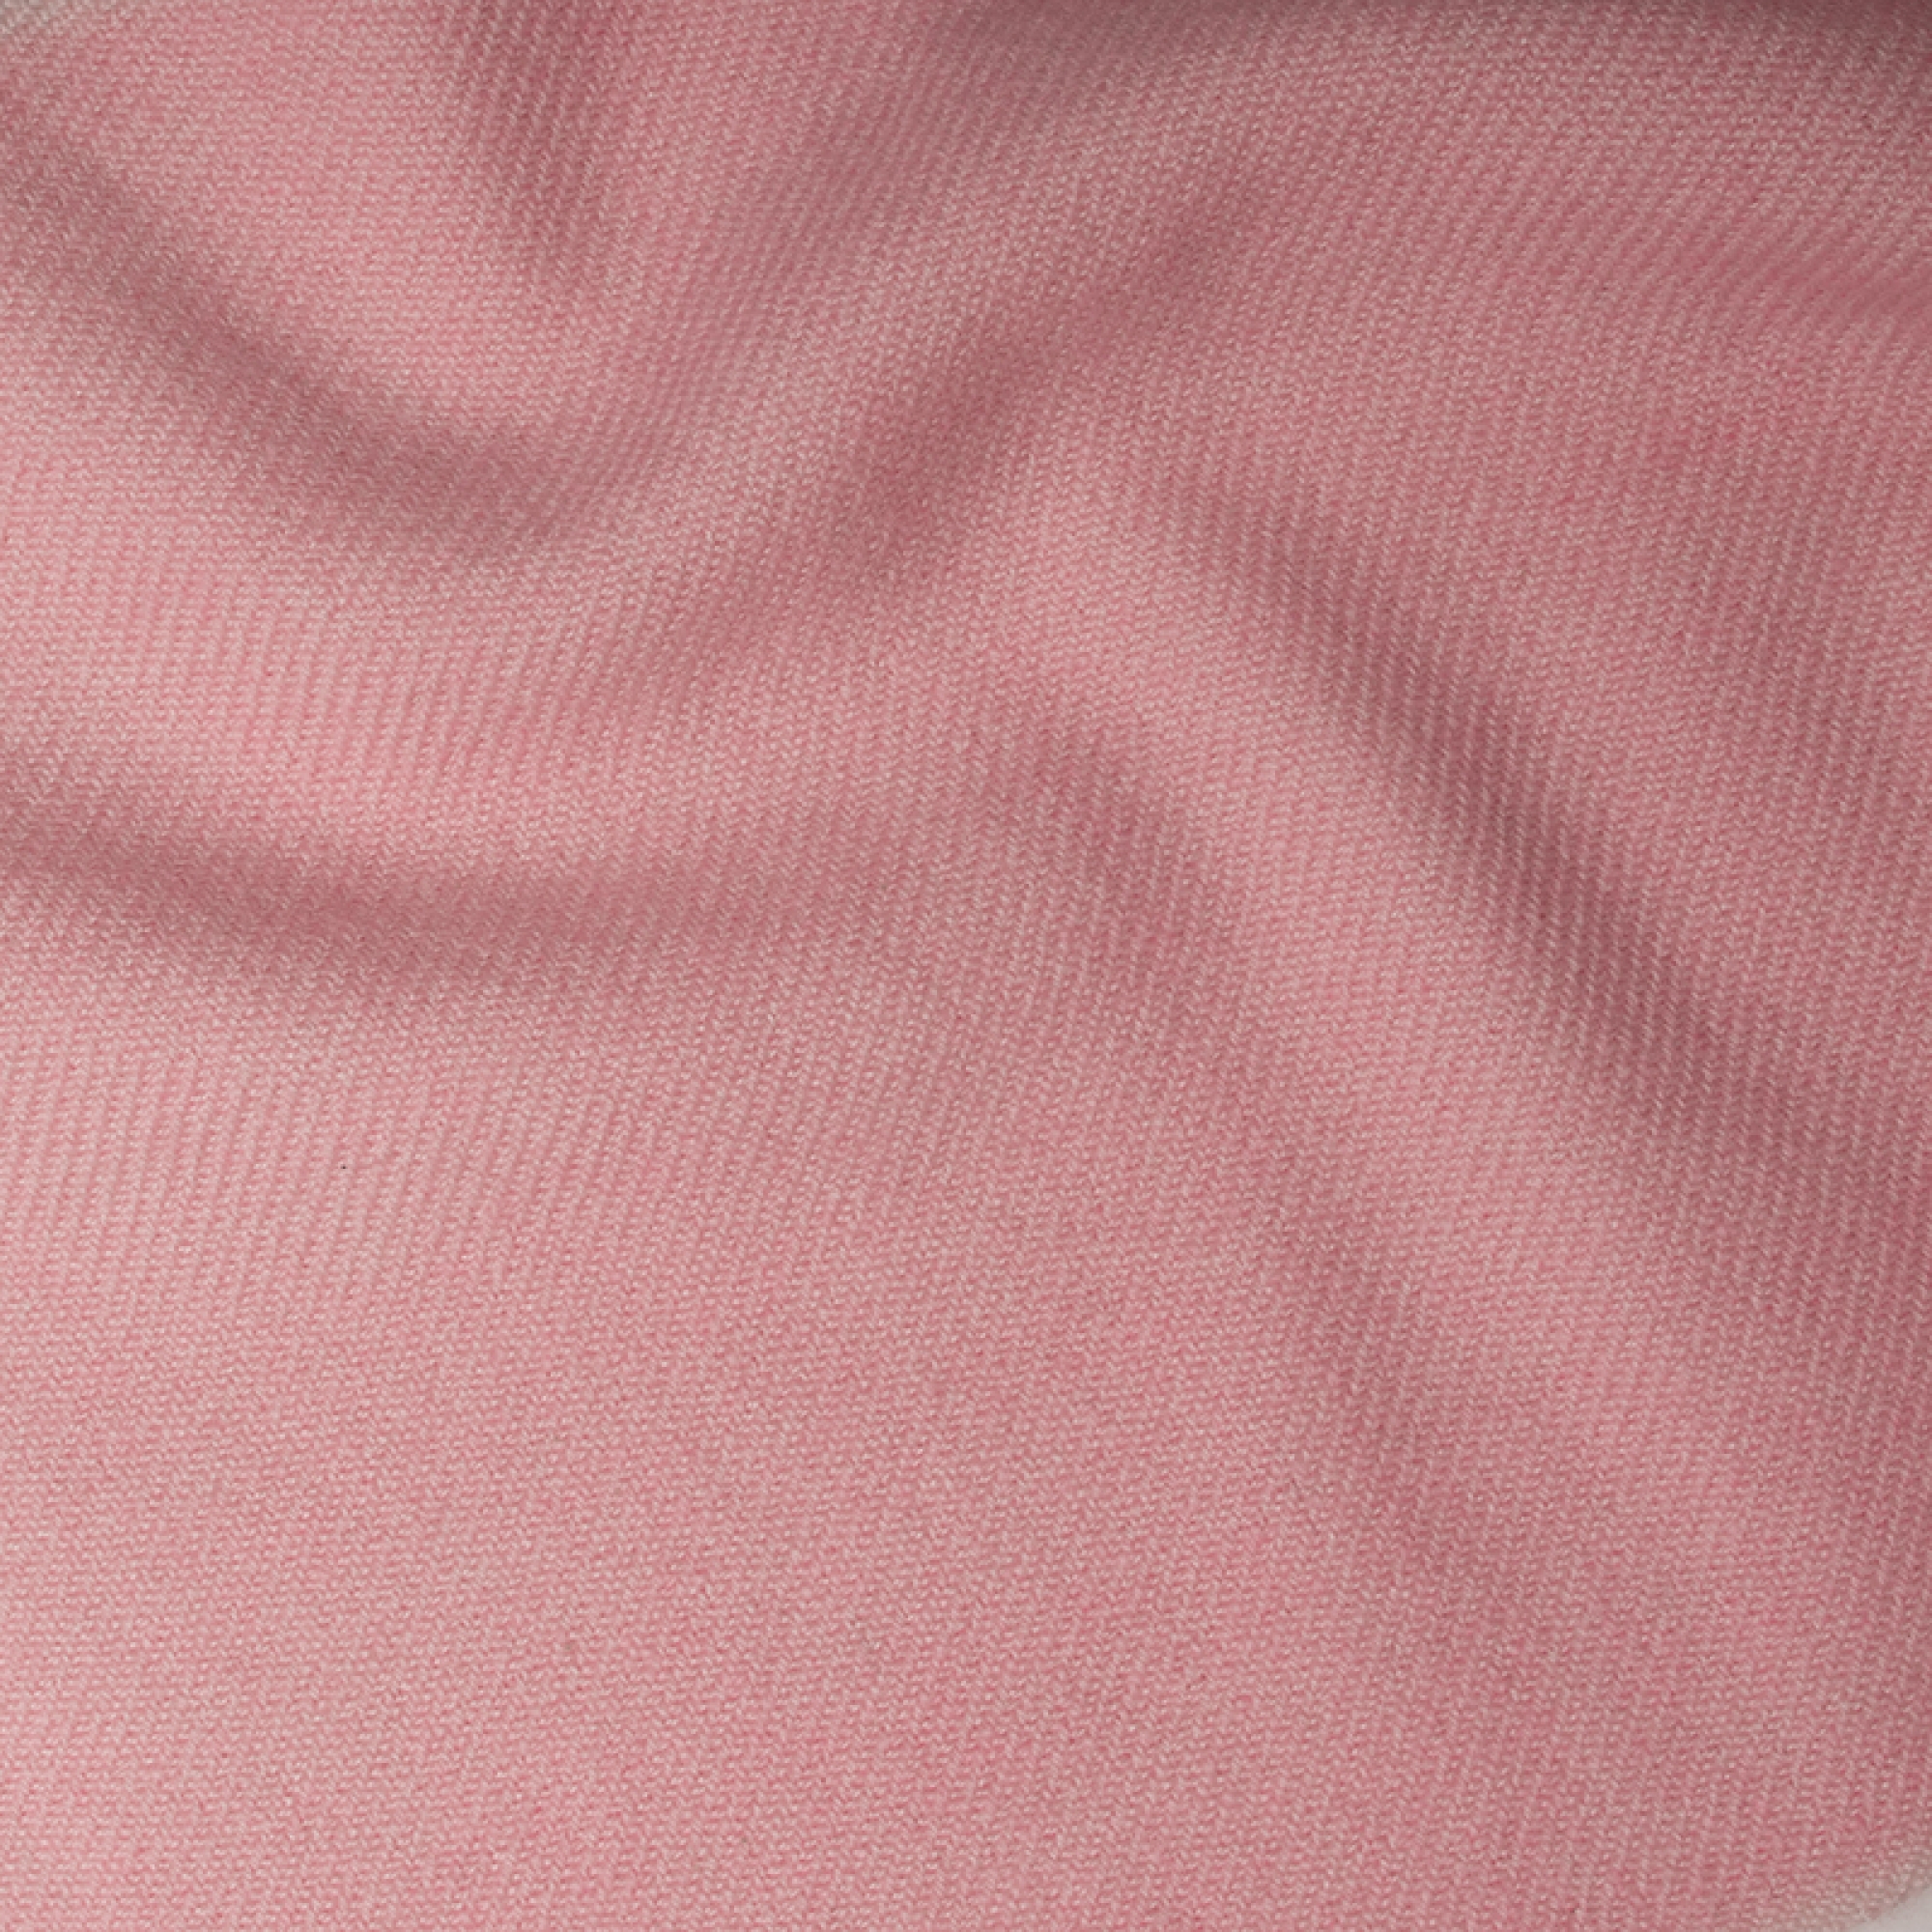 Cashmere accessories cocooning toodoo plain m 180 x 220 blushing bride 180 x 220 cm